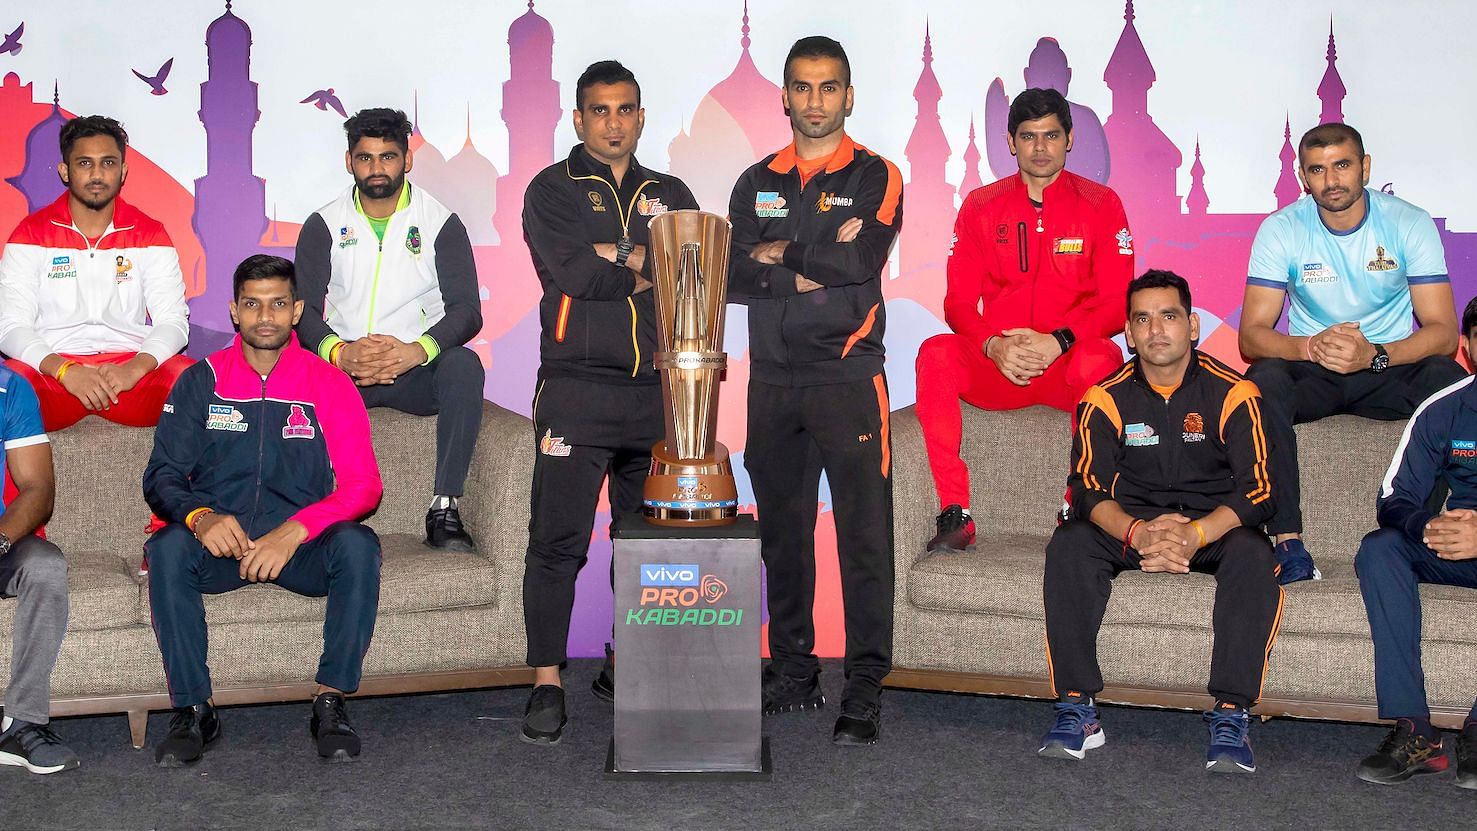 PKL 2019 Schedule: The season 7 of Pro Kabaddi League will begin on July 20 and the finals will be held on October 19.